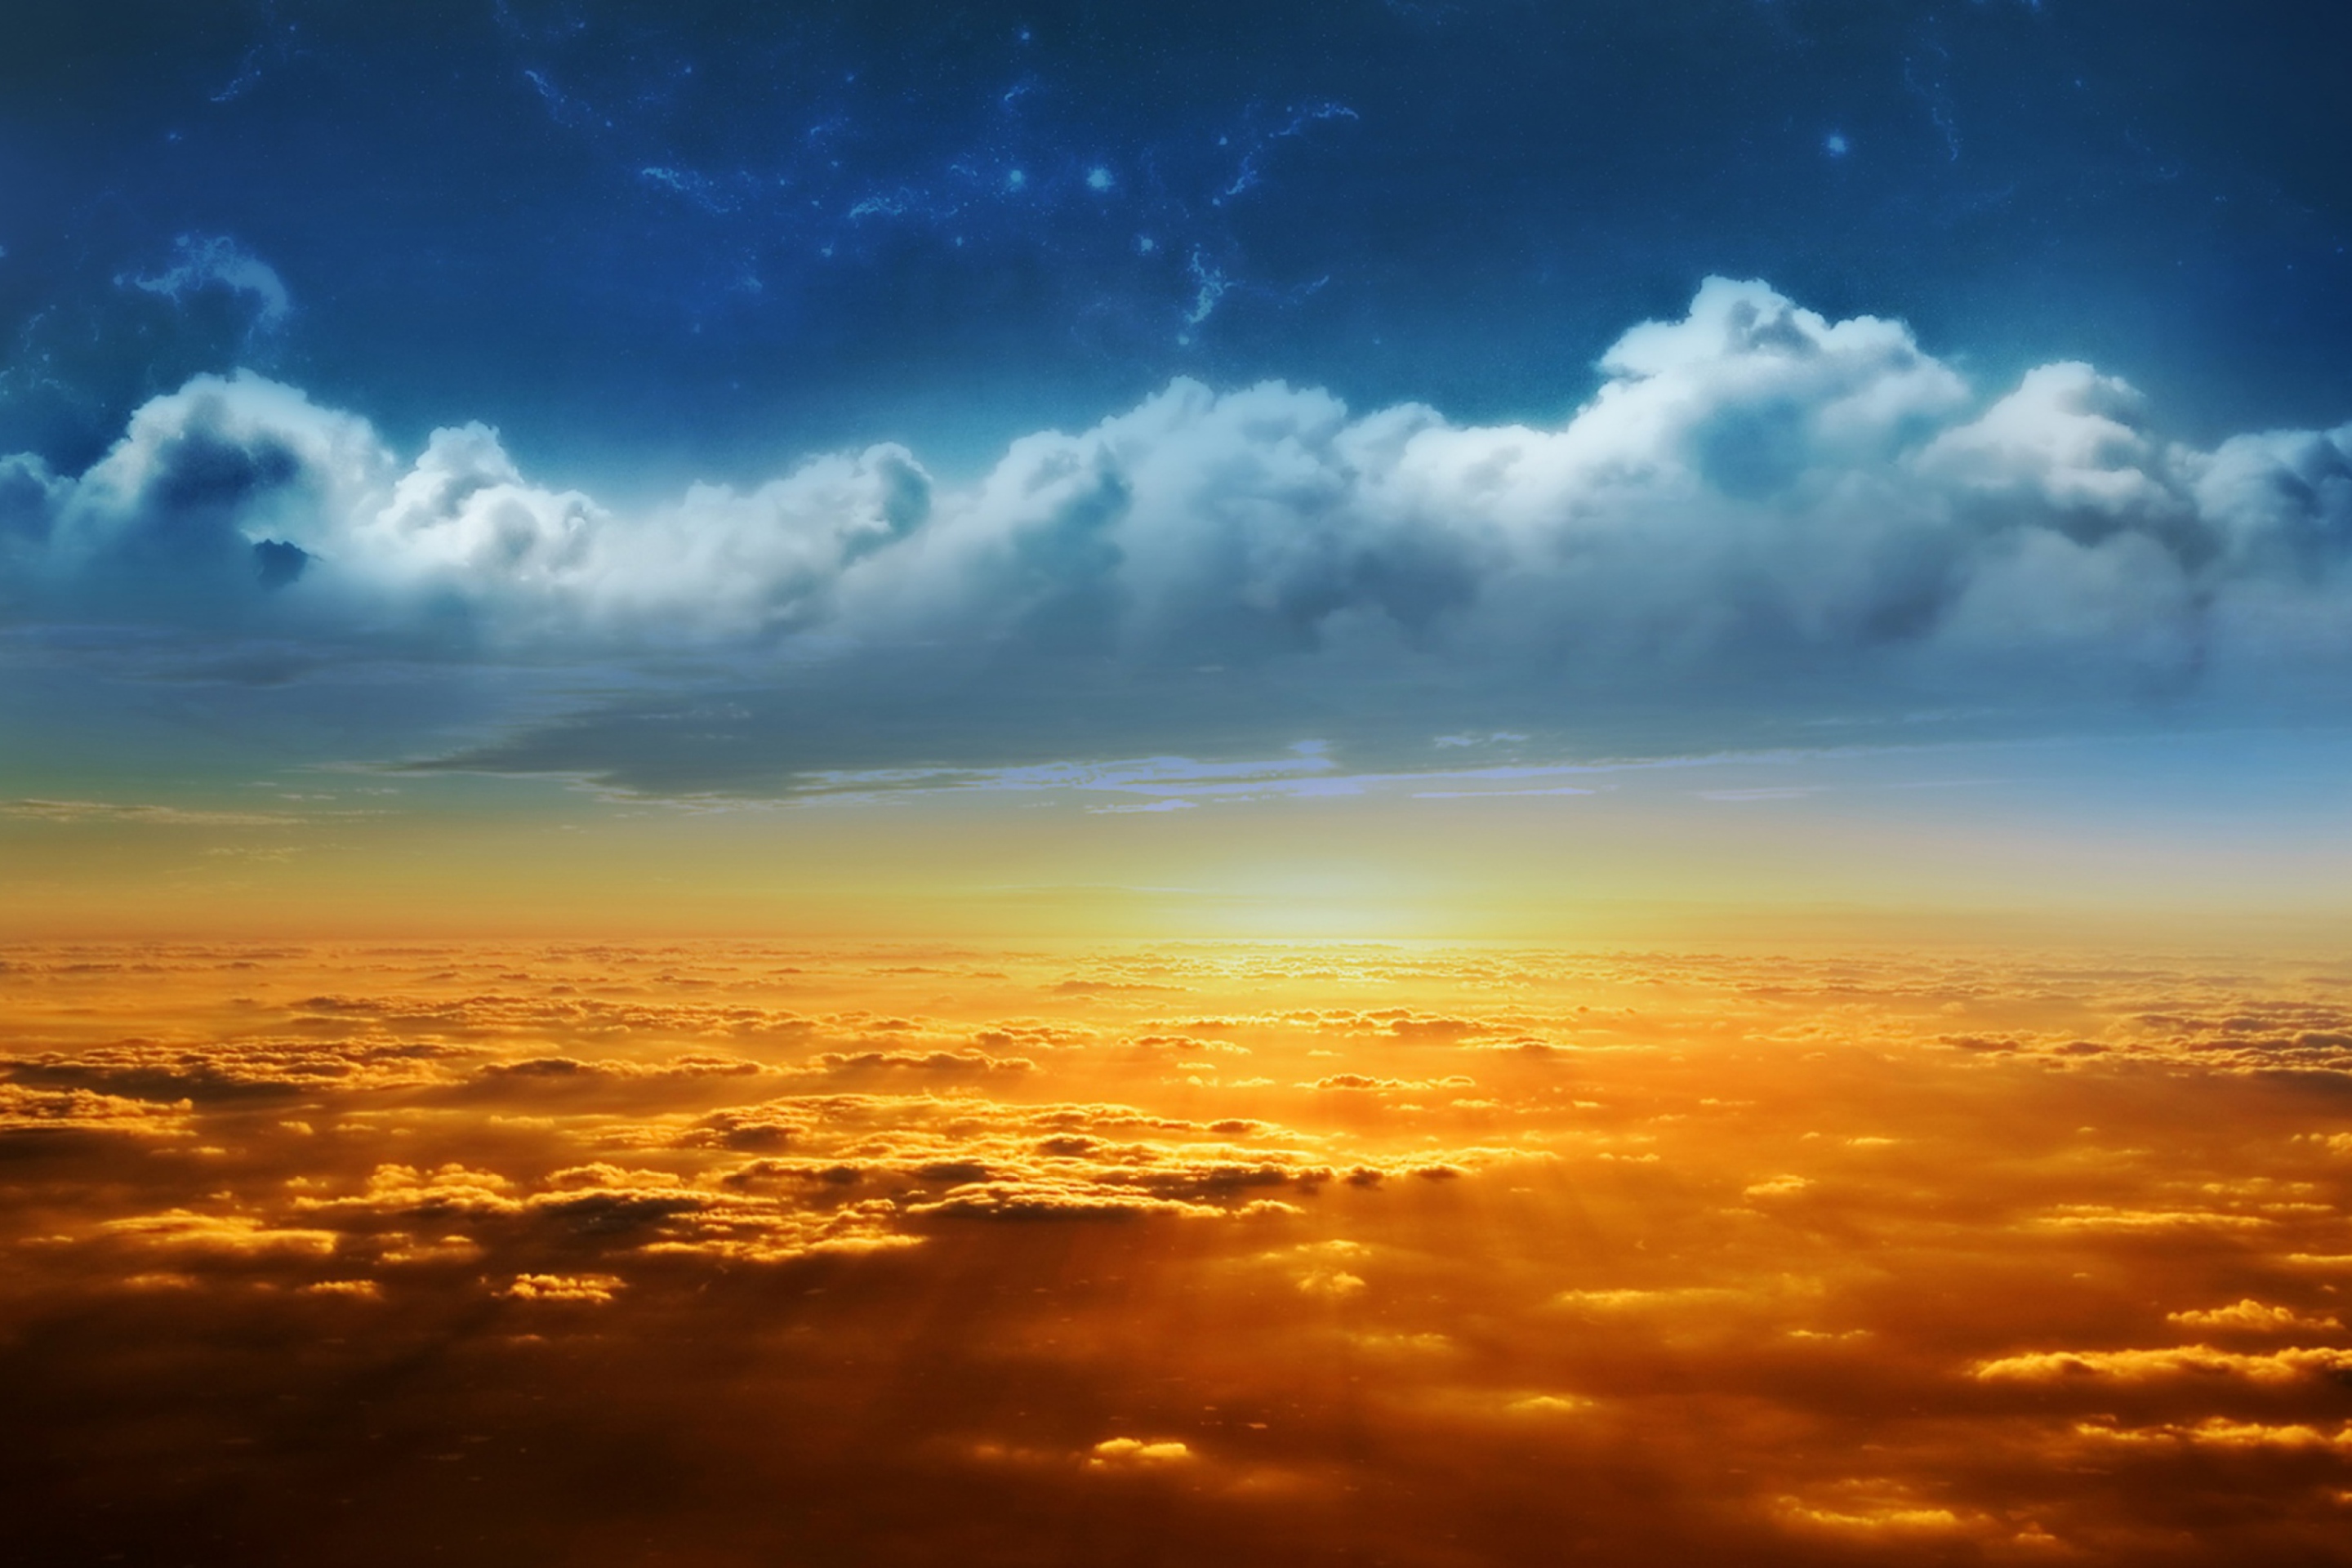 Behind The Clouds wallpaper 2880x1920